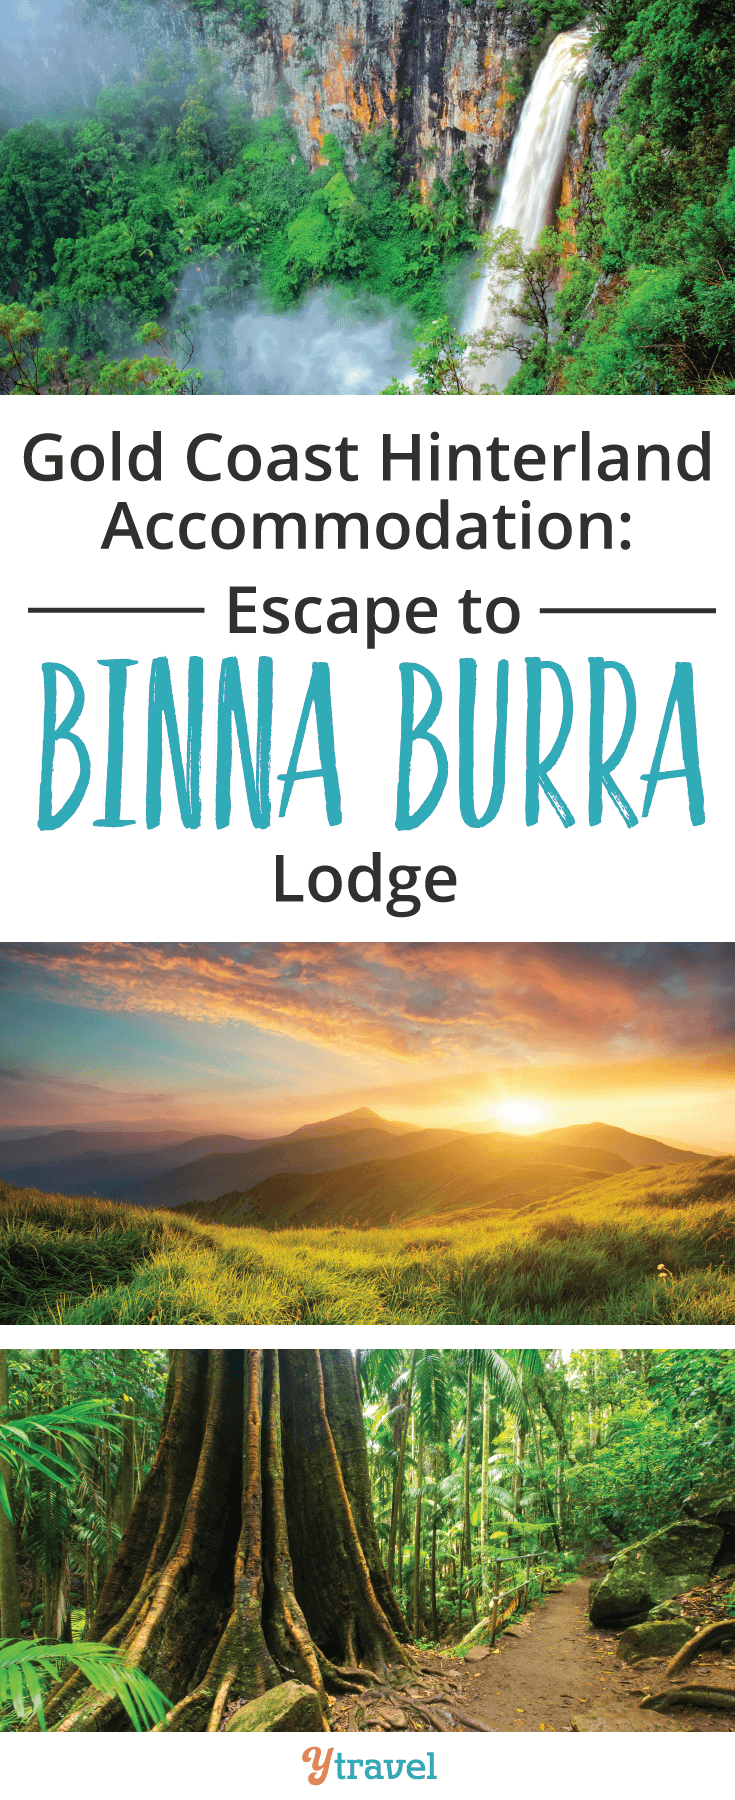 Looking for an awesome weekend getaway? Check out the Gold Coast Hinterland Accommodation at Binna Burra Lodge!